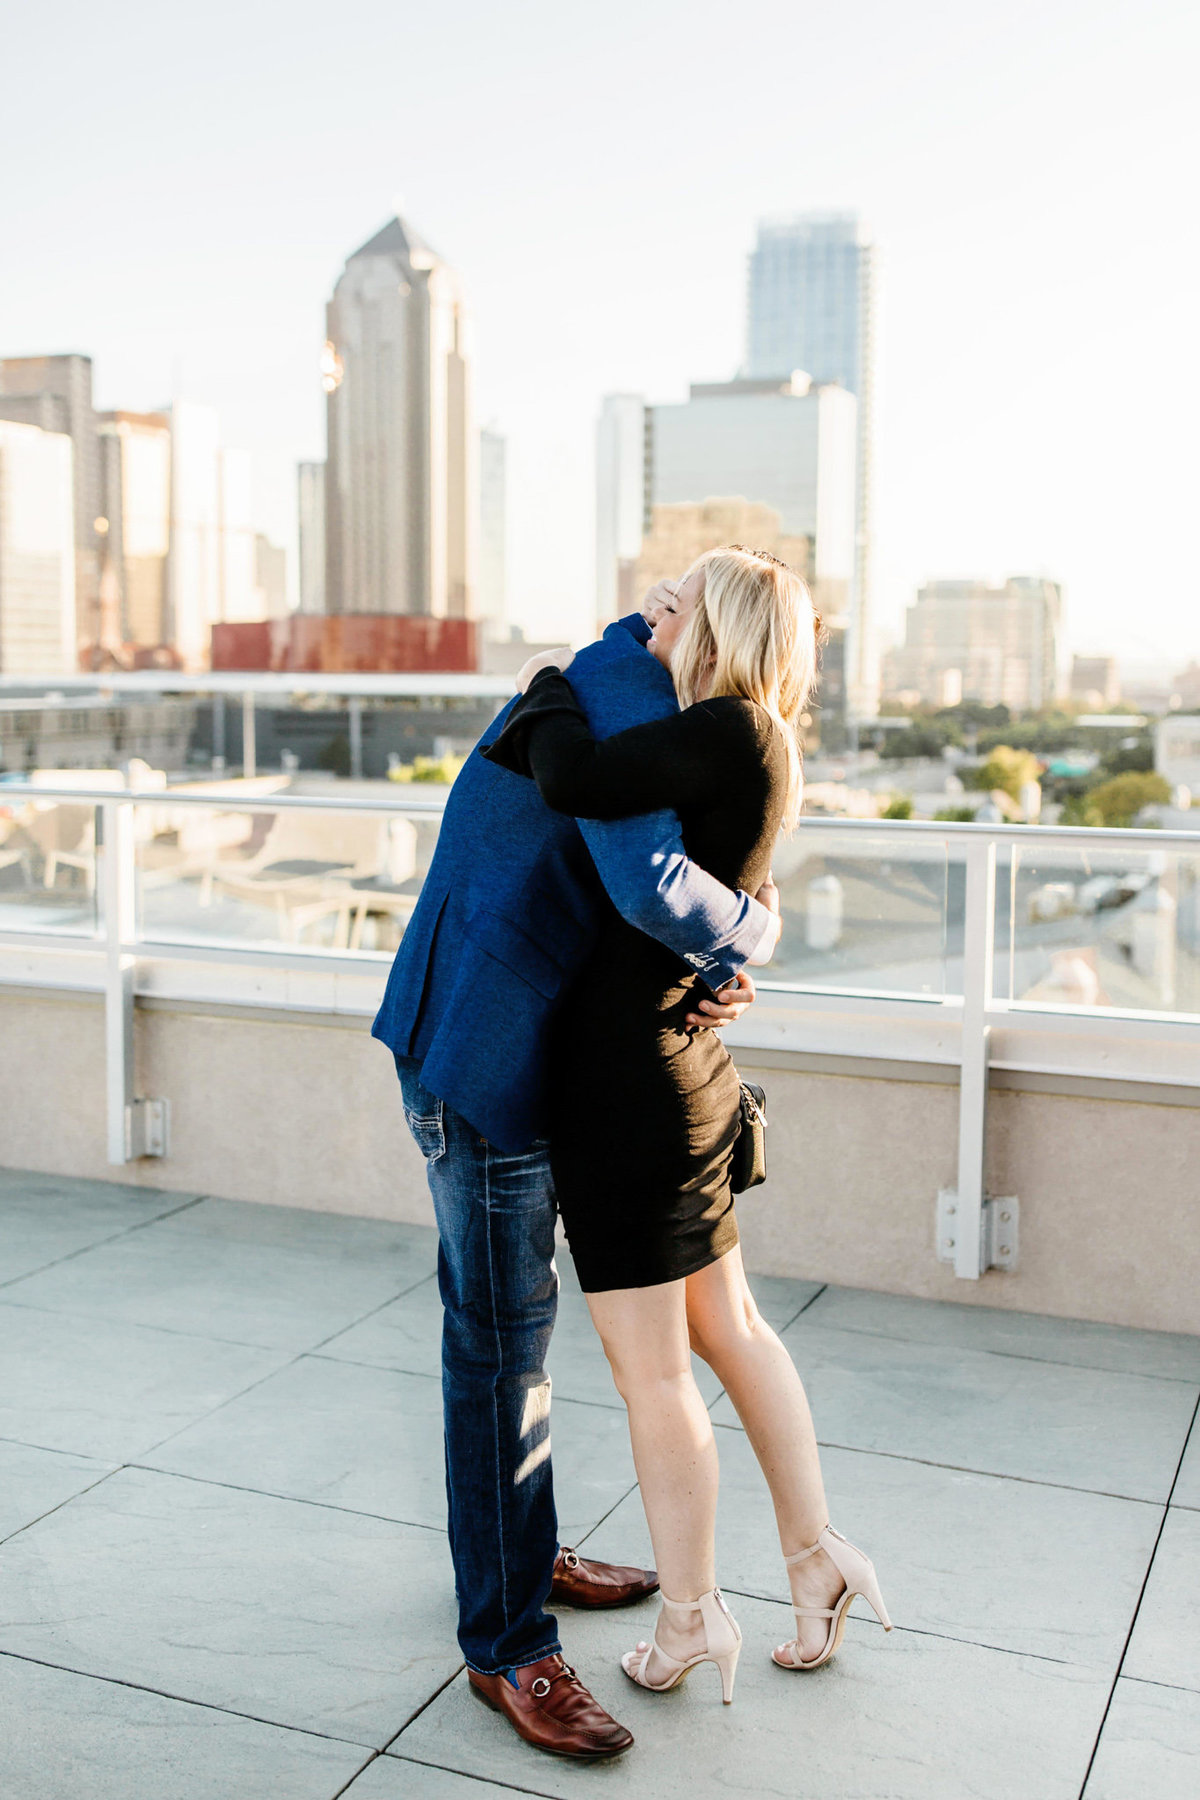 Eric & Megan - Downtown Dallas Rooftop Proposal & Engagement Session-39